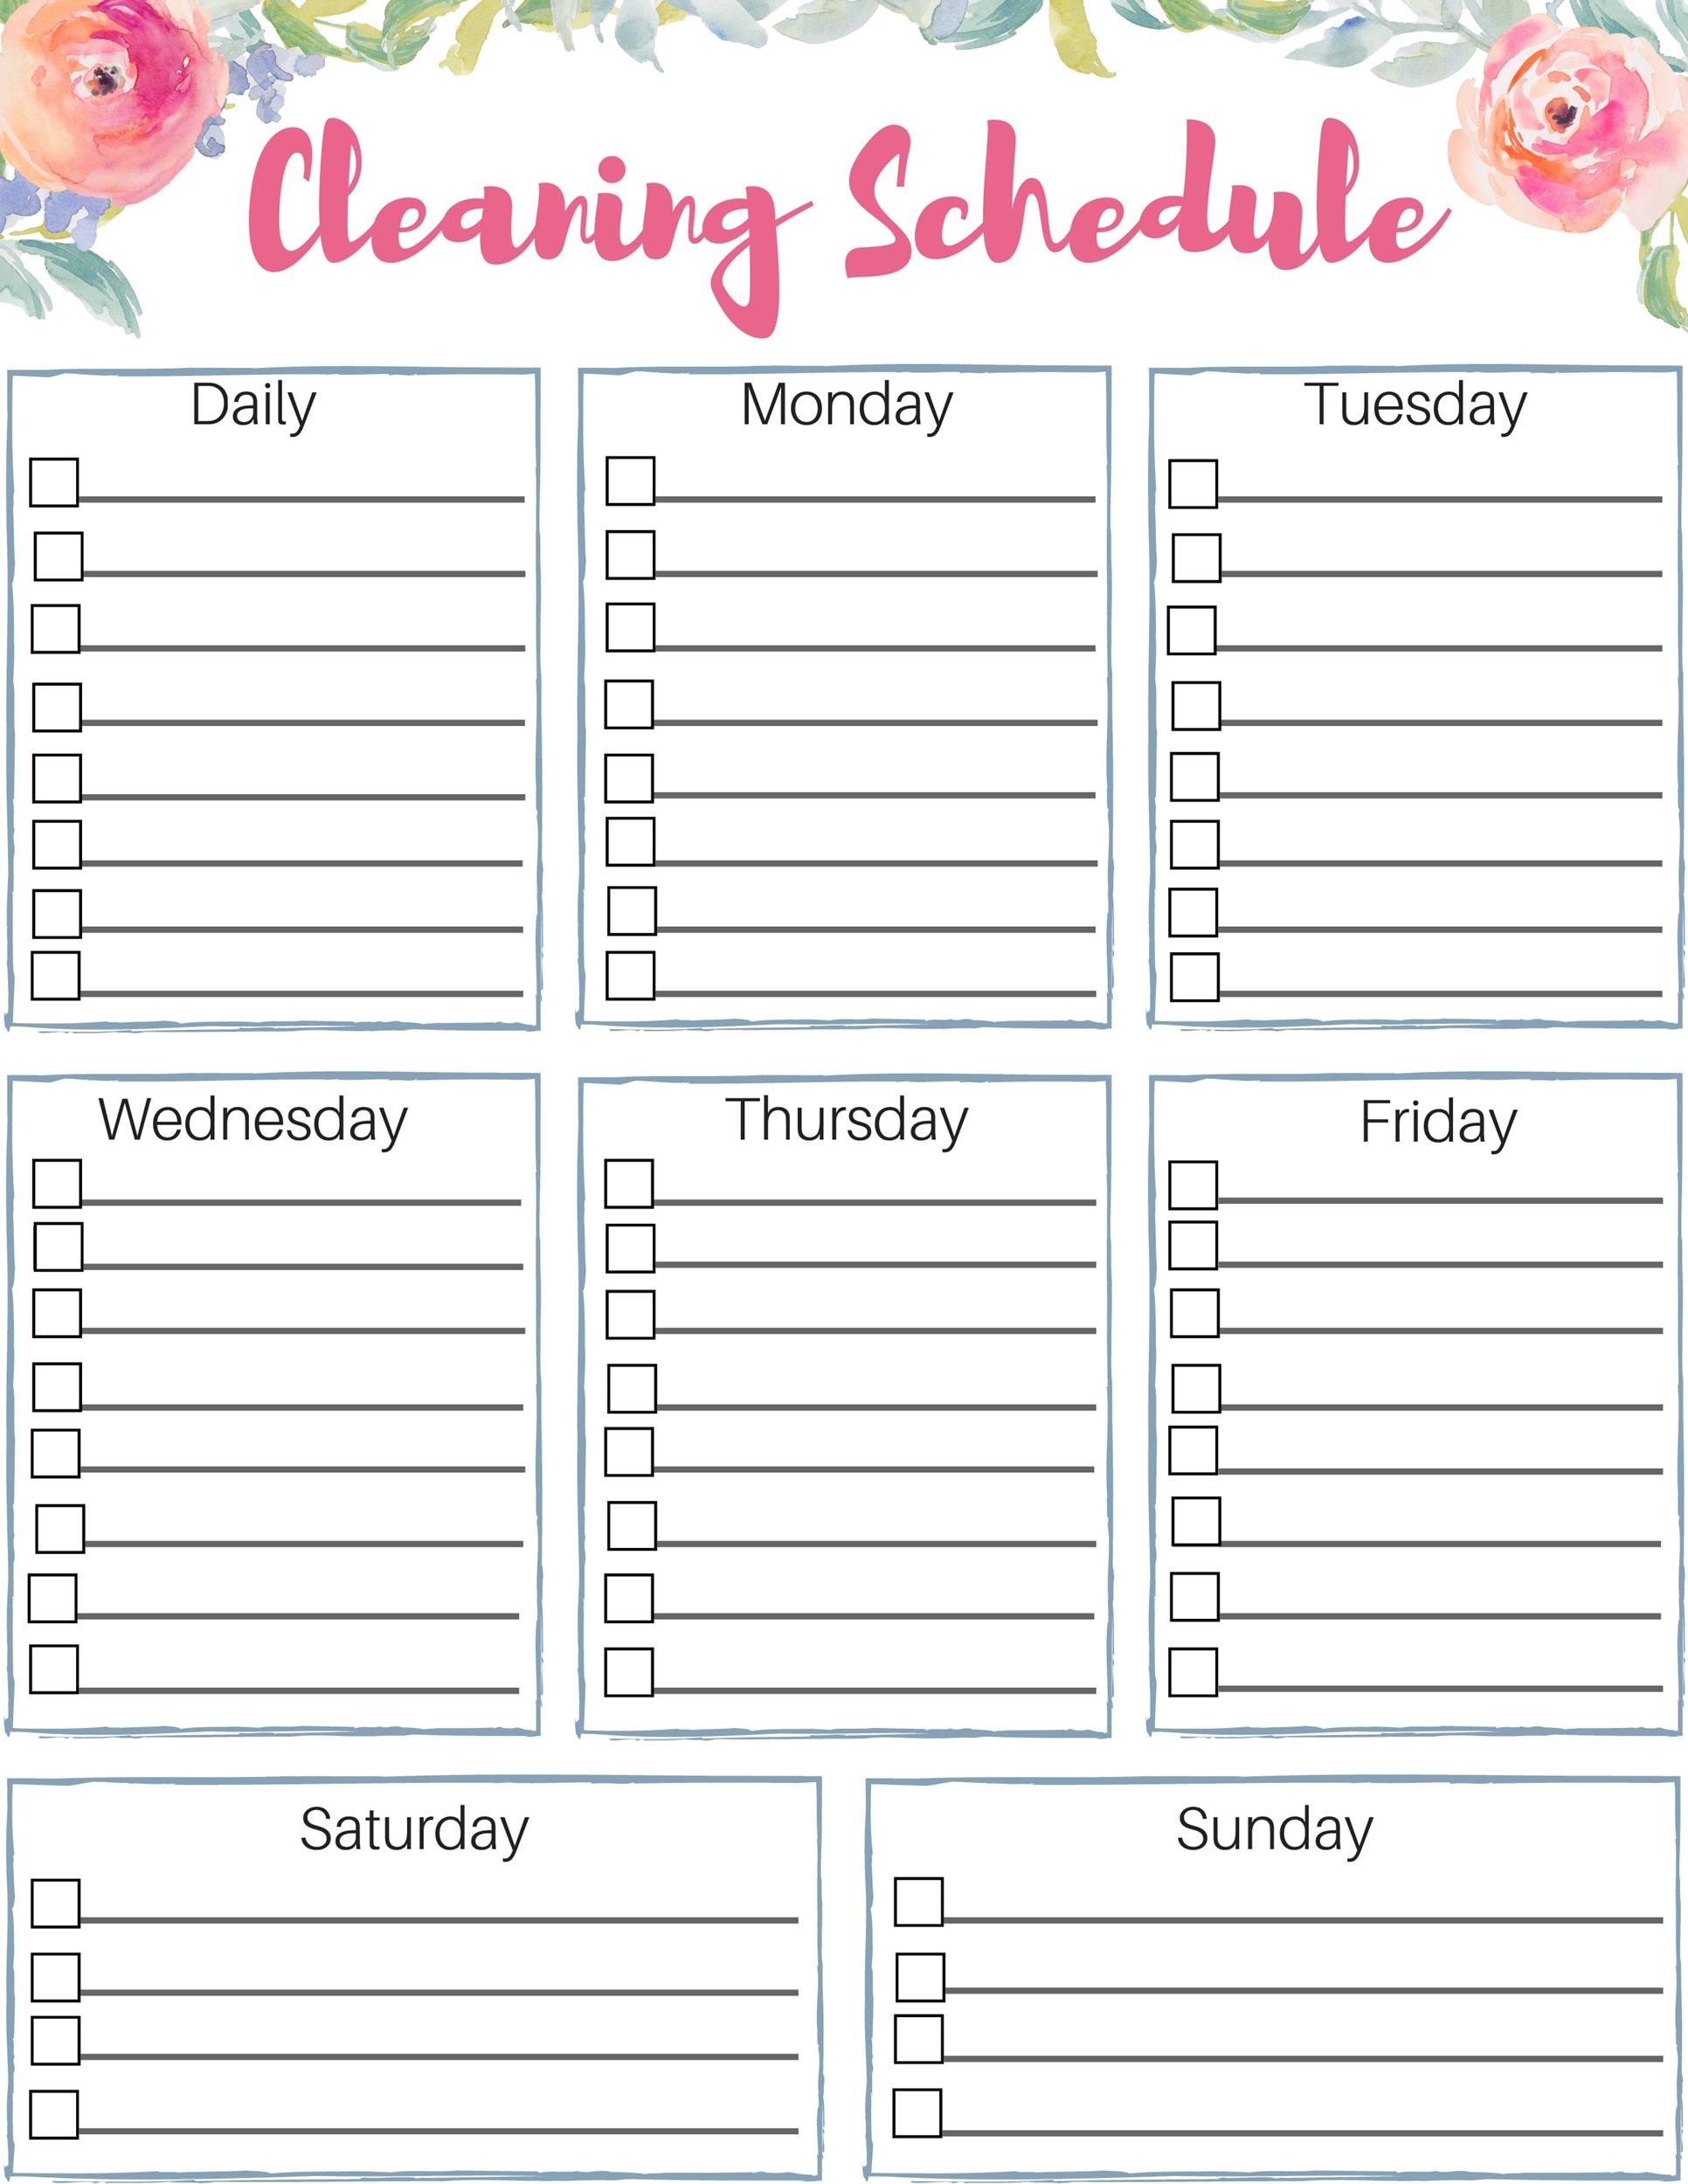 a-basic-cleaning-schedule-checklist-printable-cleaning-schedule